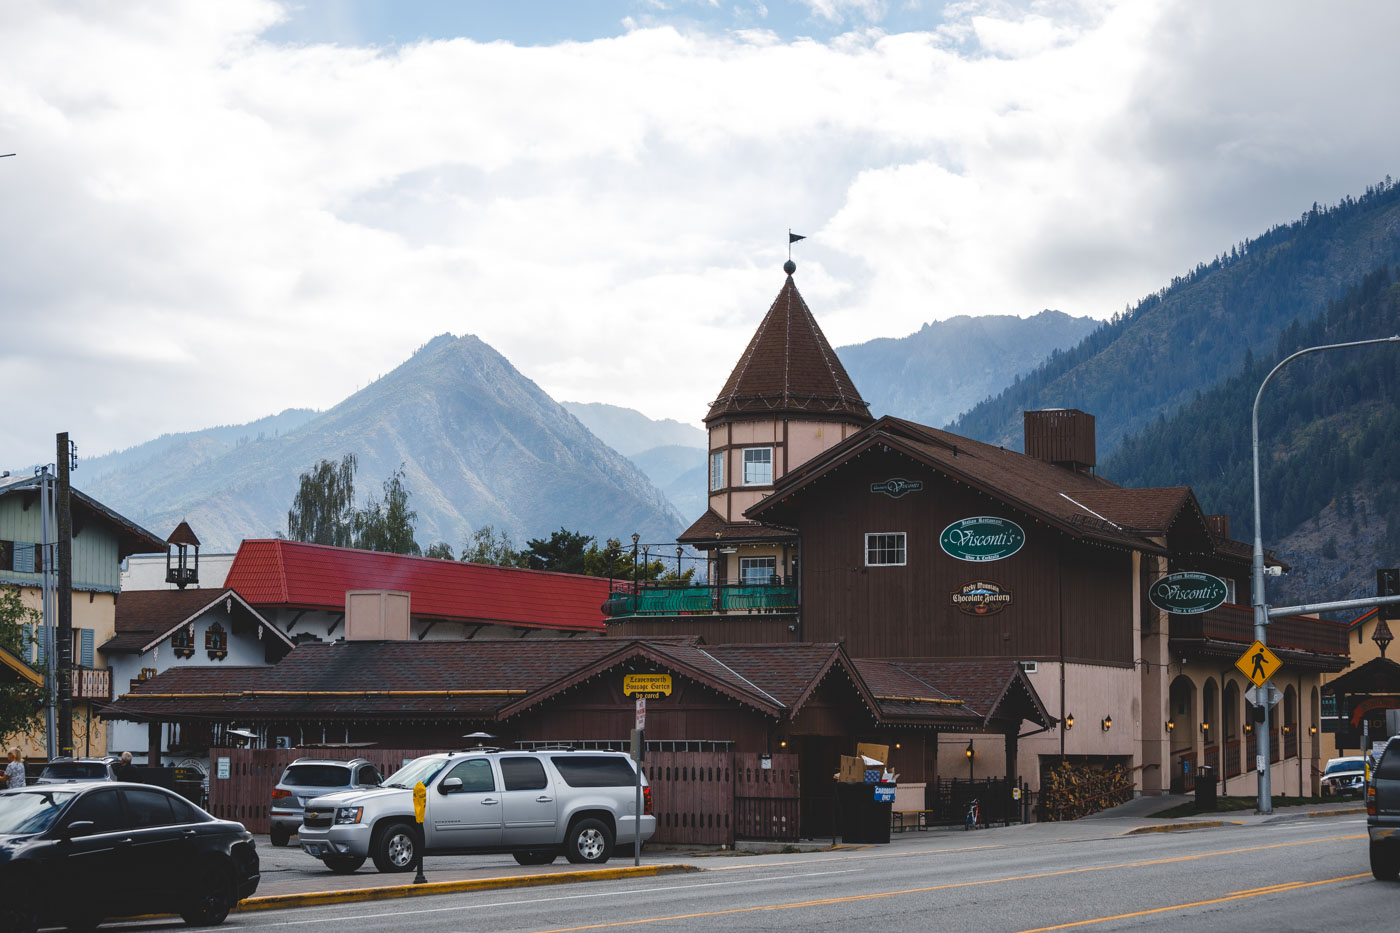 German-style buildings in downtown Leavenworth with mountains in the distance.